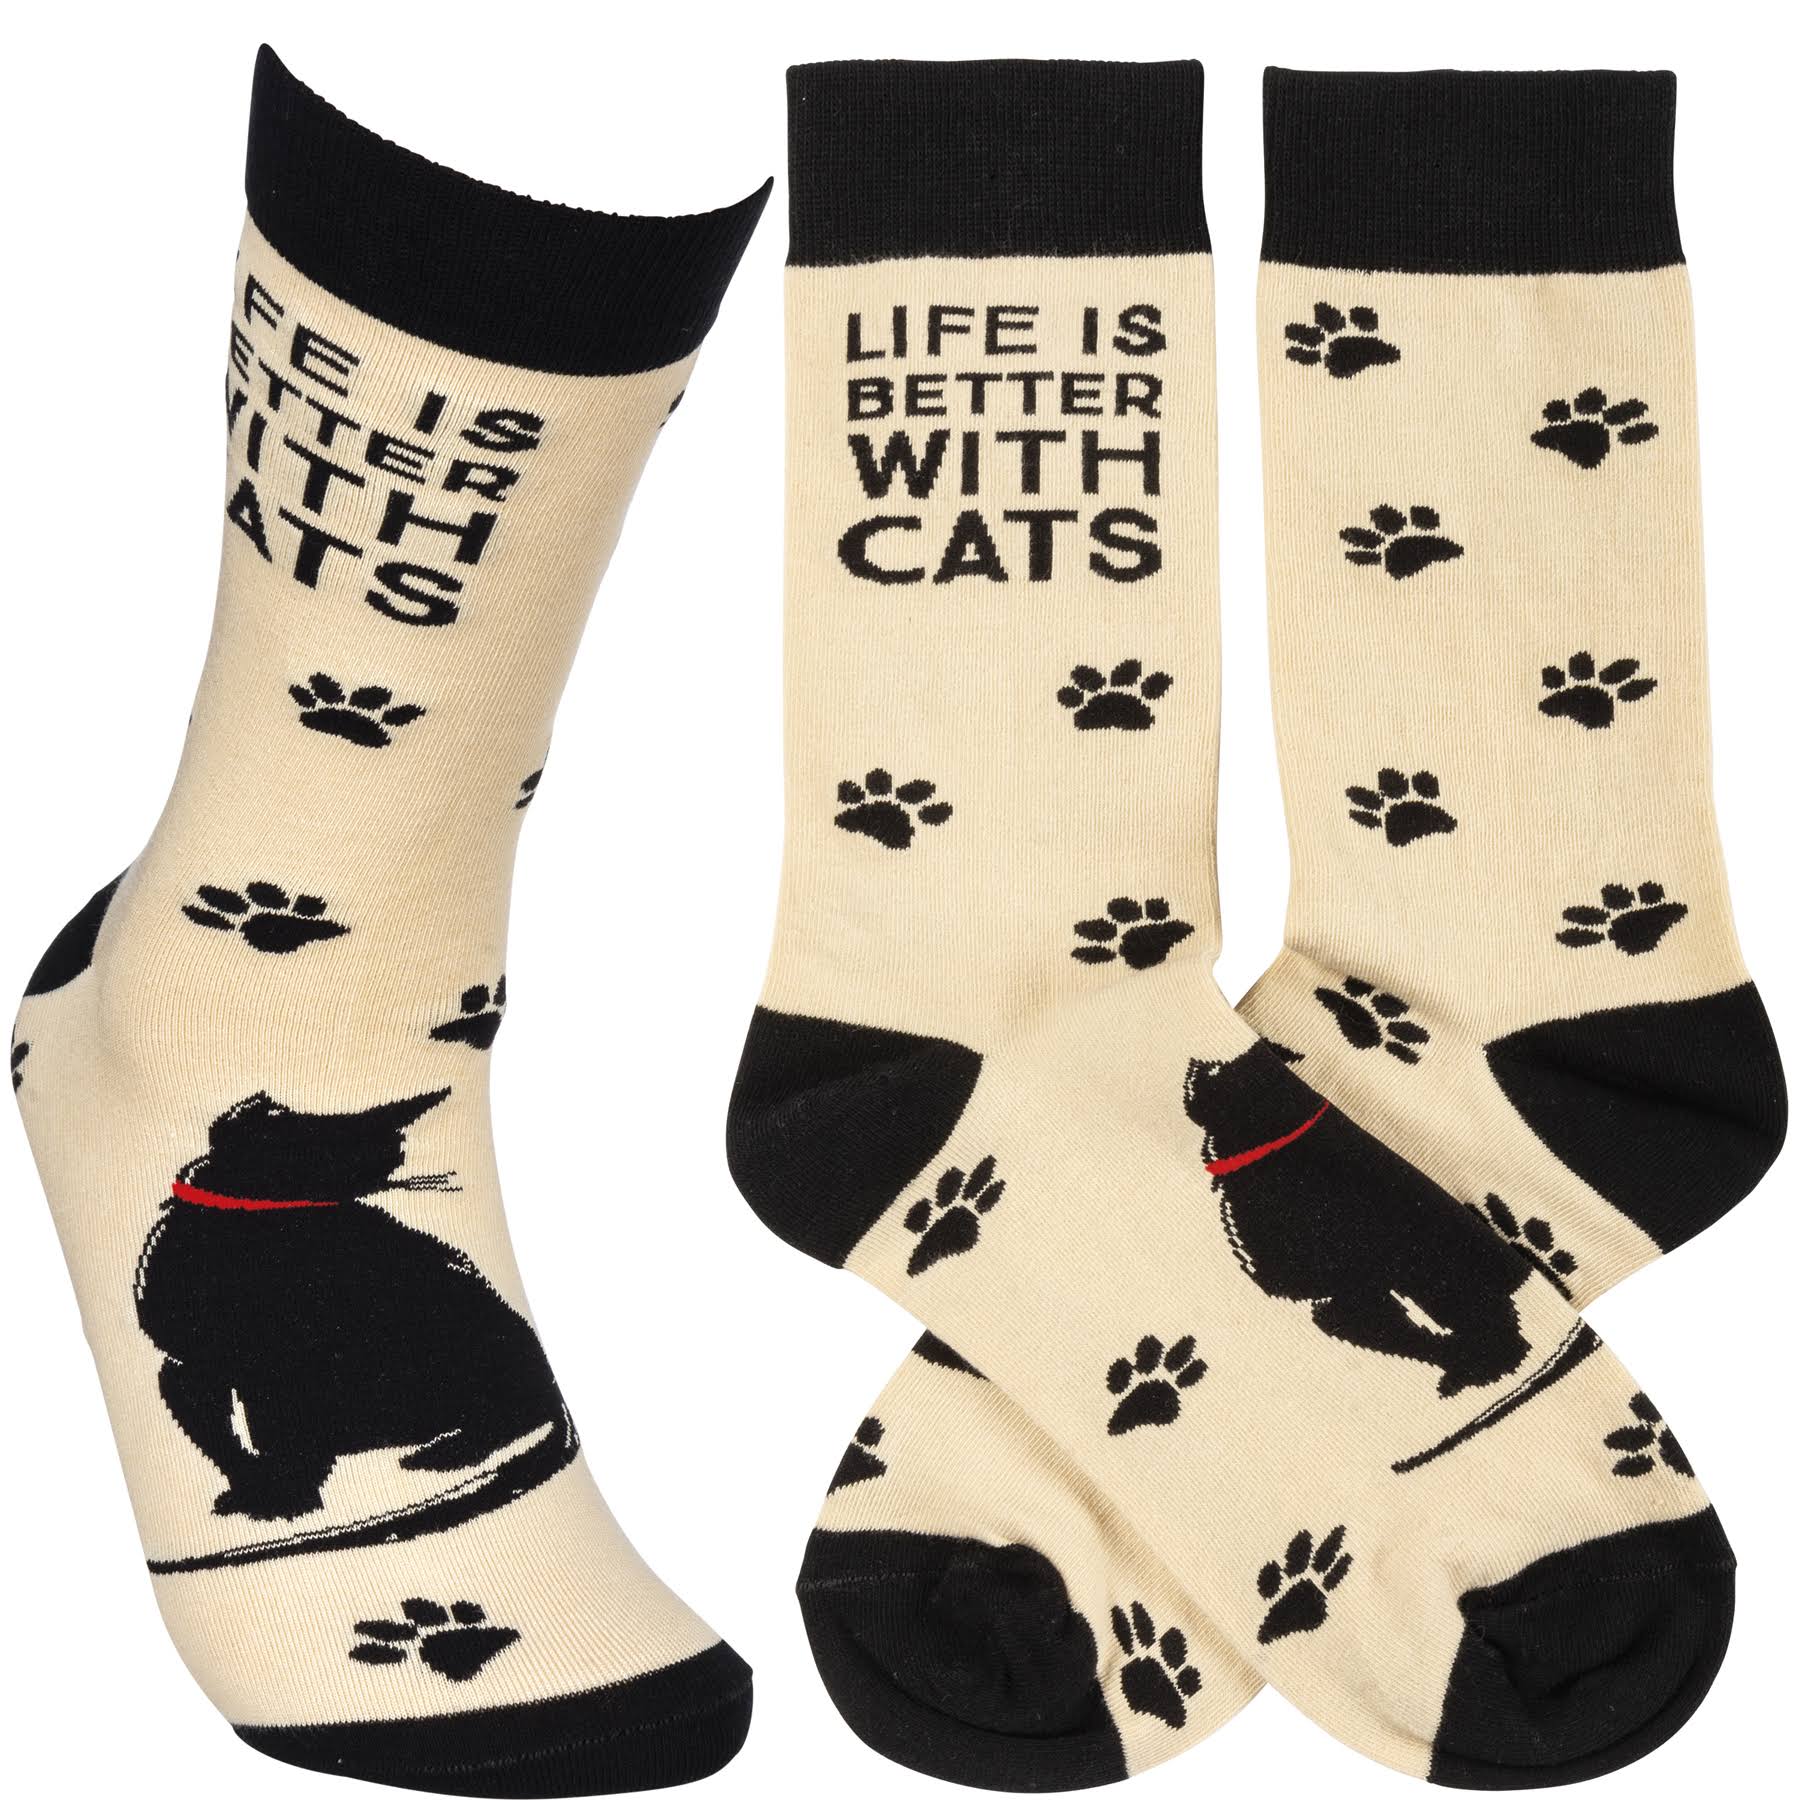 Primitives by Kathy Life Is Better with Cats Socks - Each